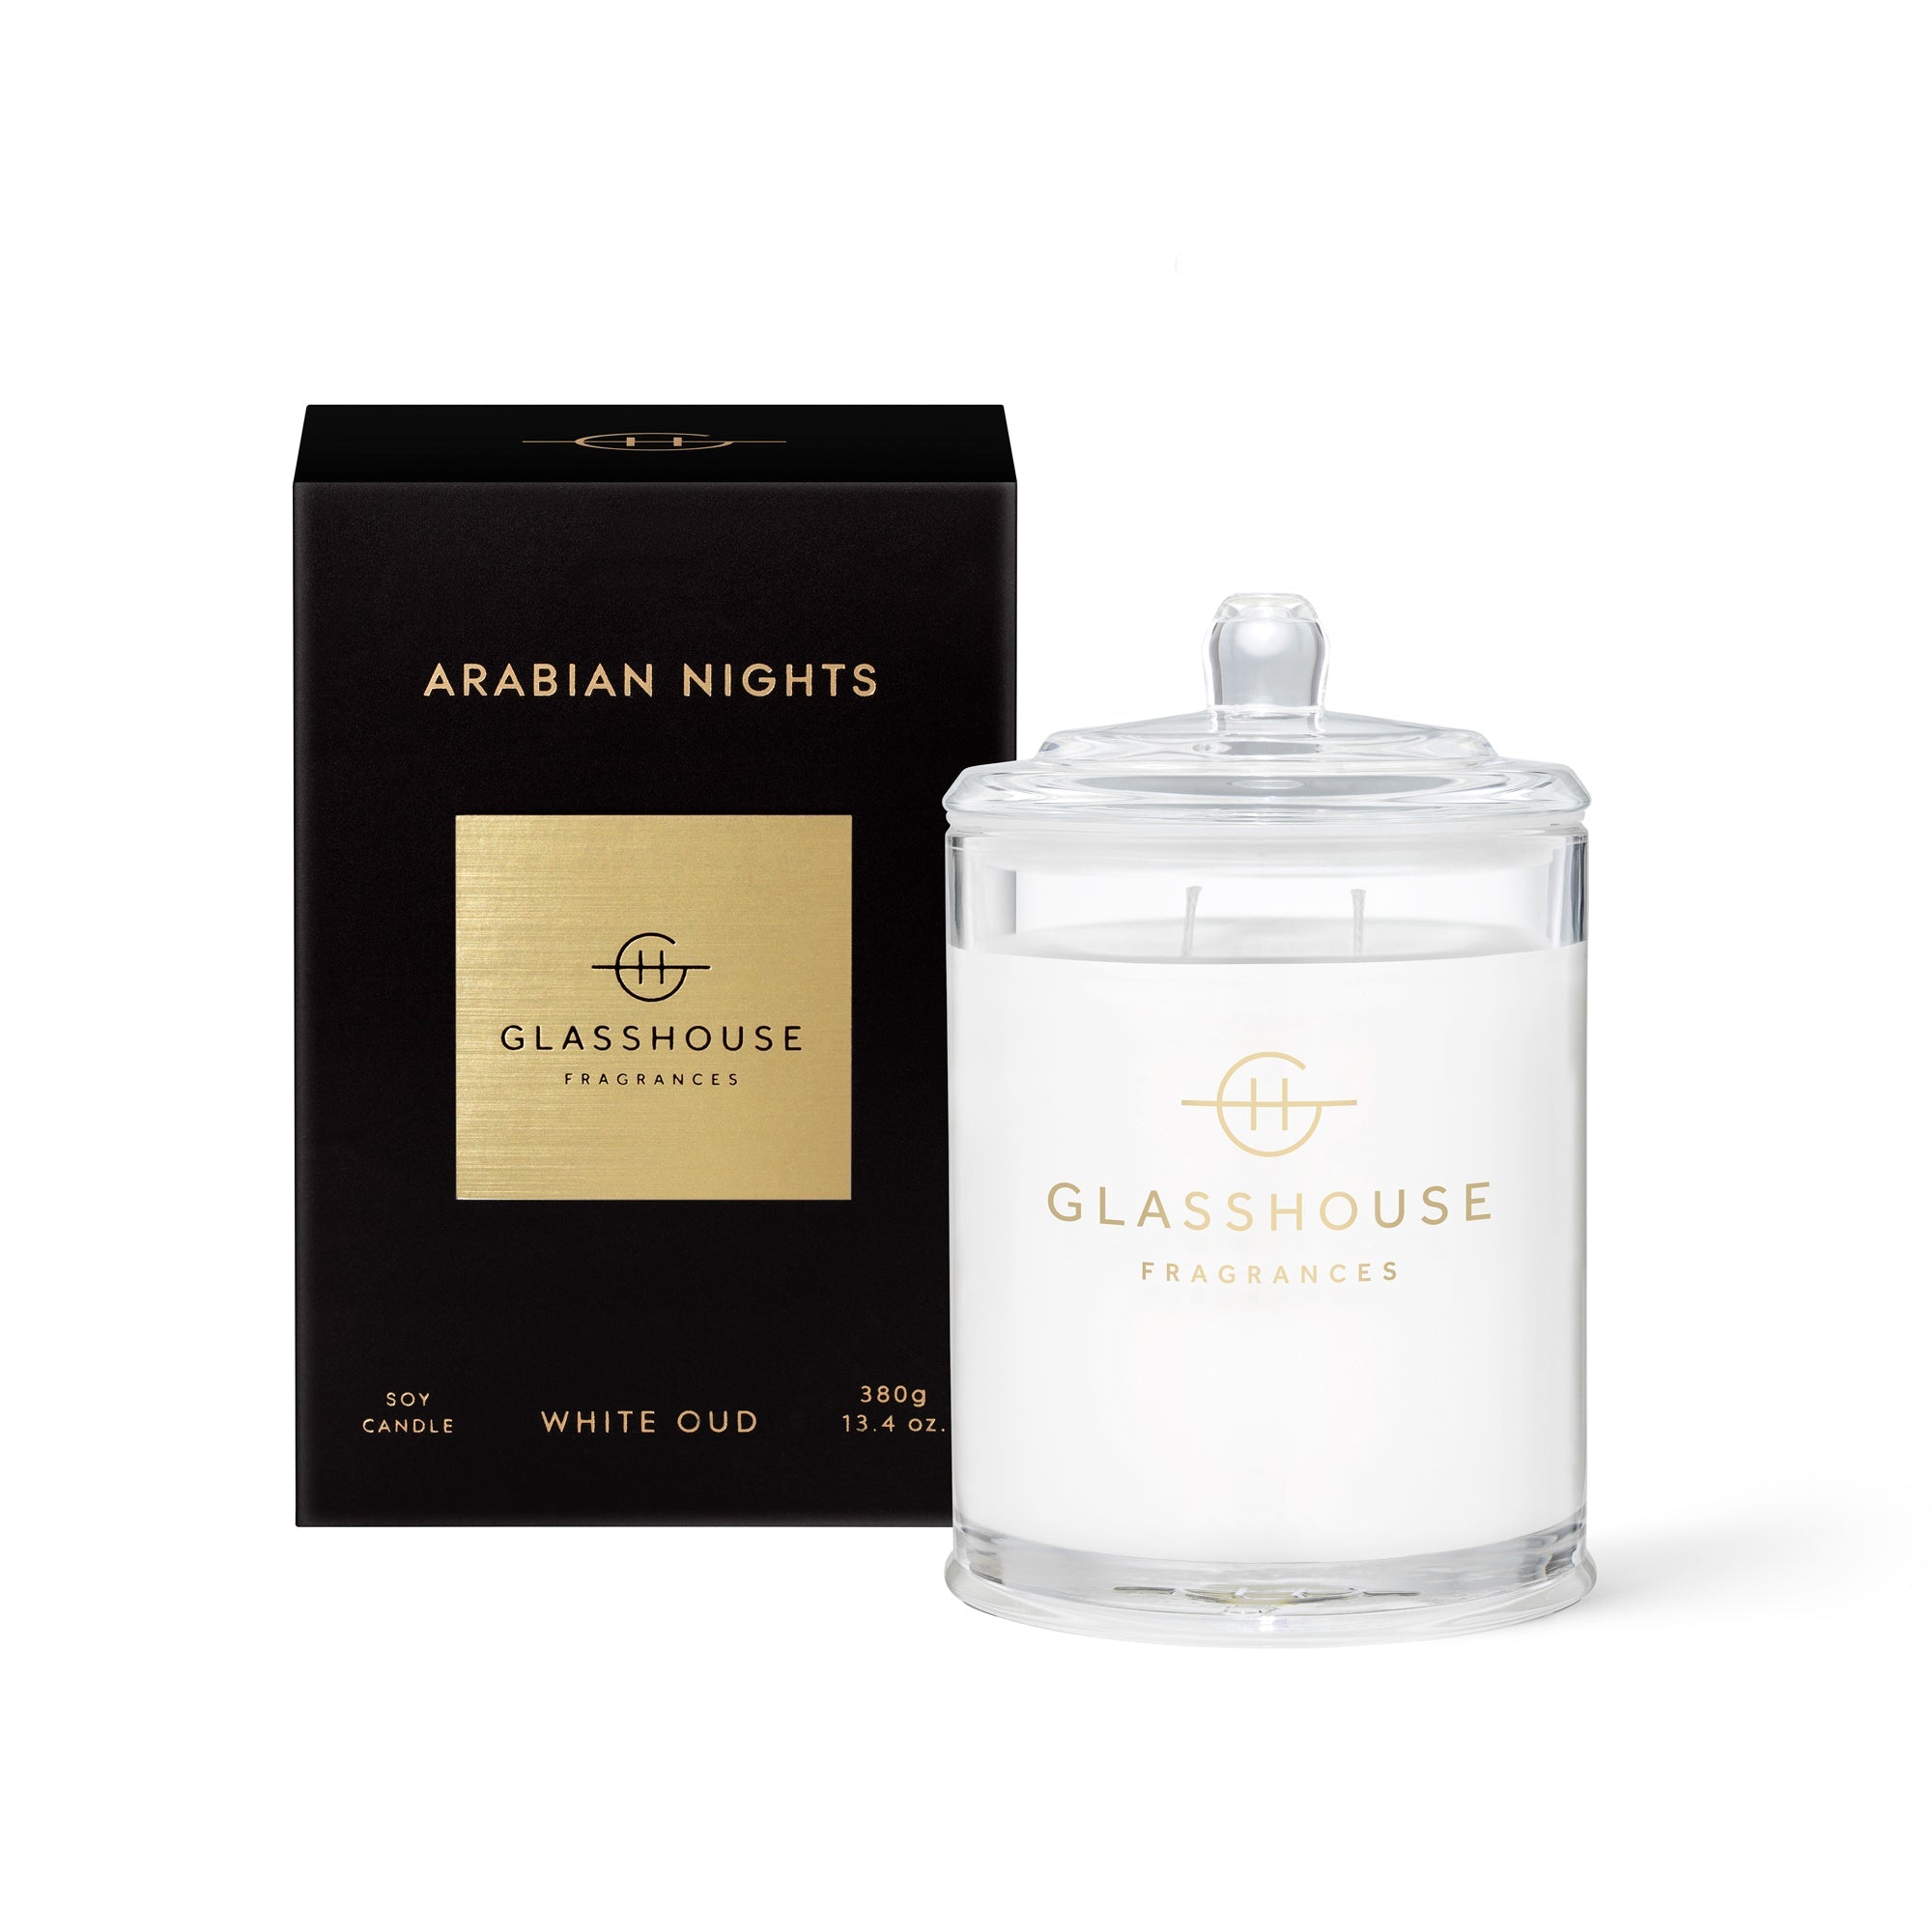 Glasshouse Arabian Nights Candle 380g - Exquisite Laser Clinic